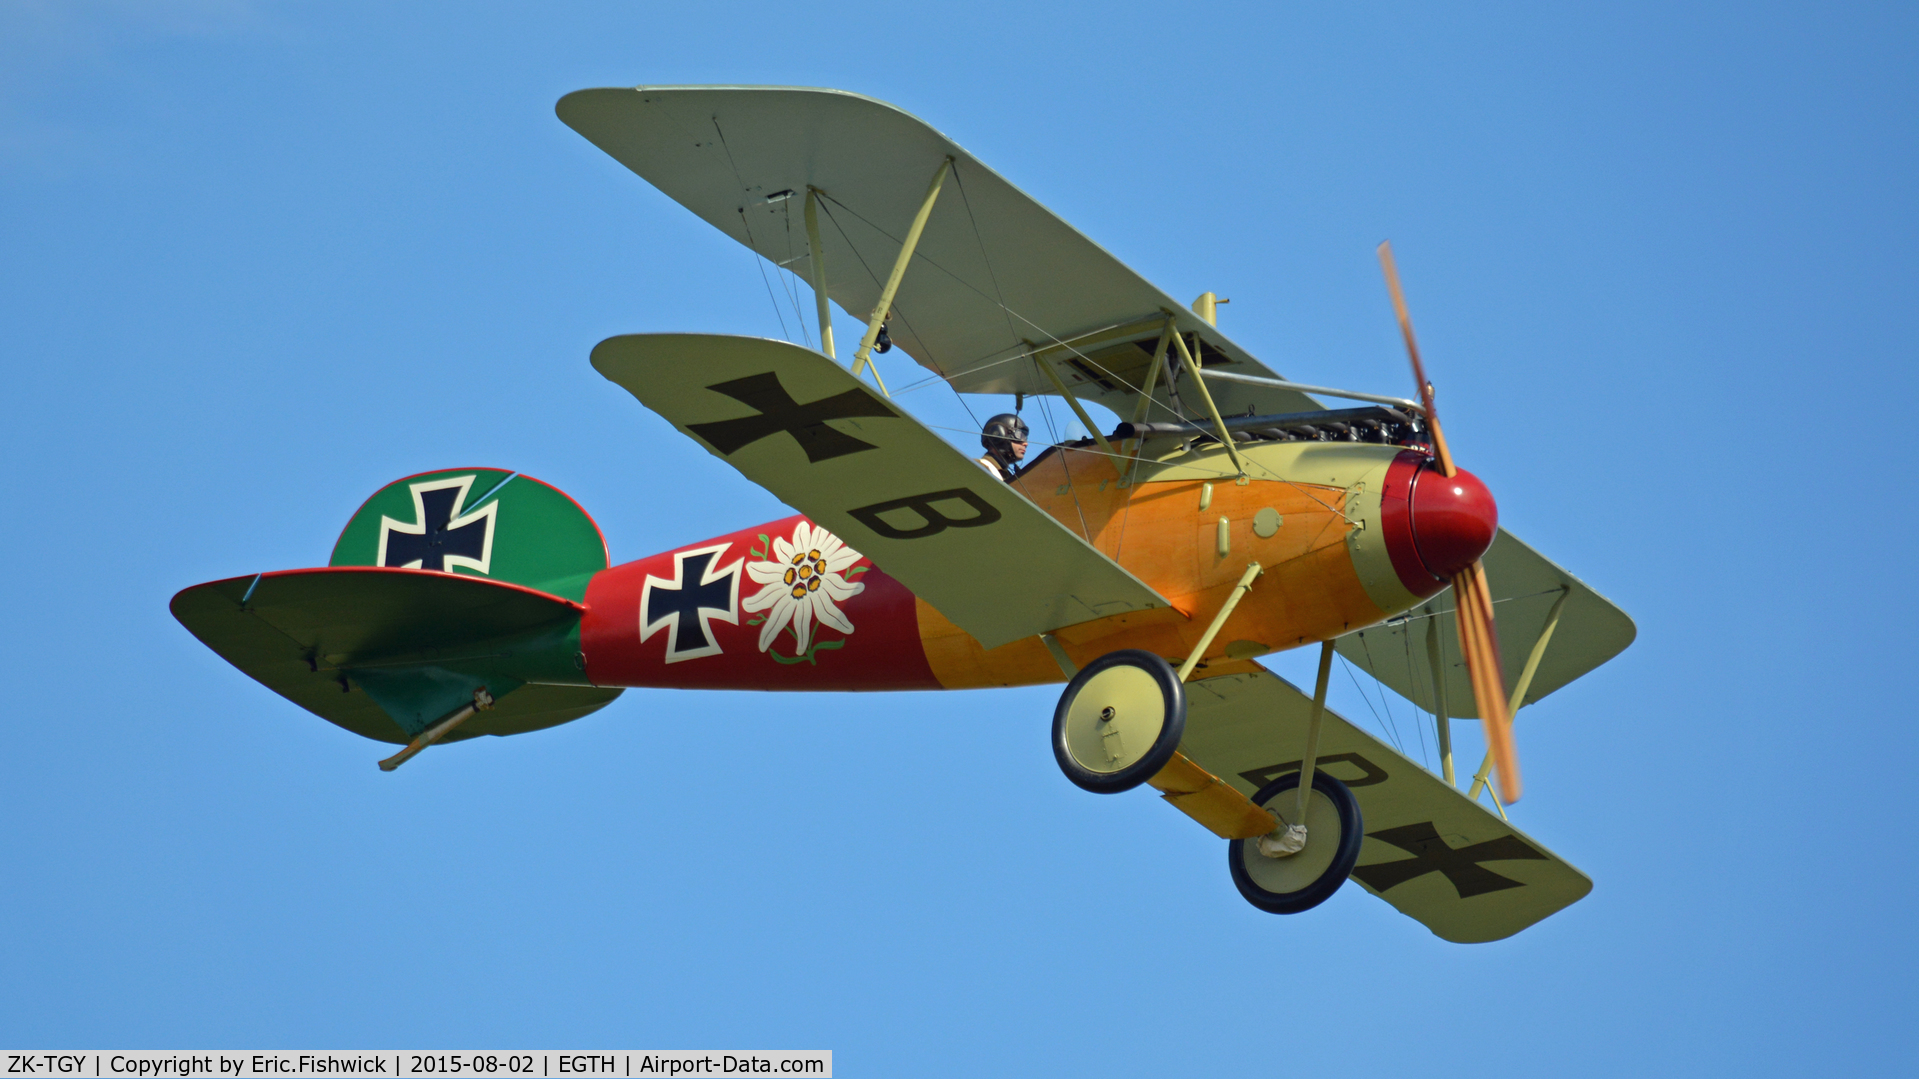 ZK-TGY, 2015 Albatros D-Va Replica C/N 5, 44. ZK-TGY in display mode at The Shuttleworth Wings and Wheels Airshow, Aug. 2015.